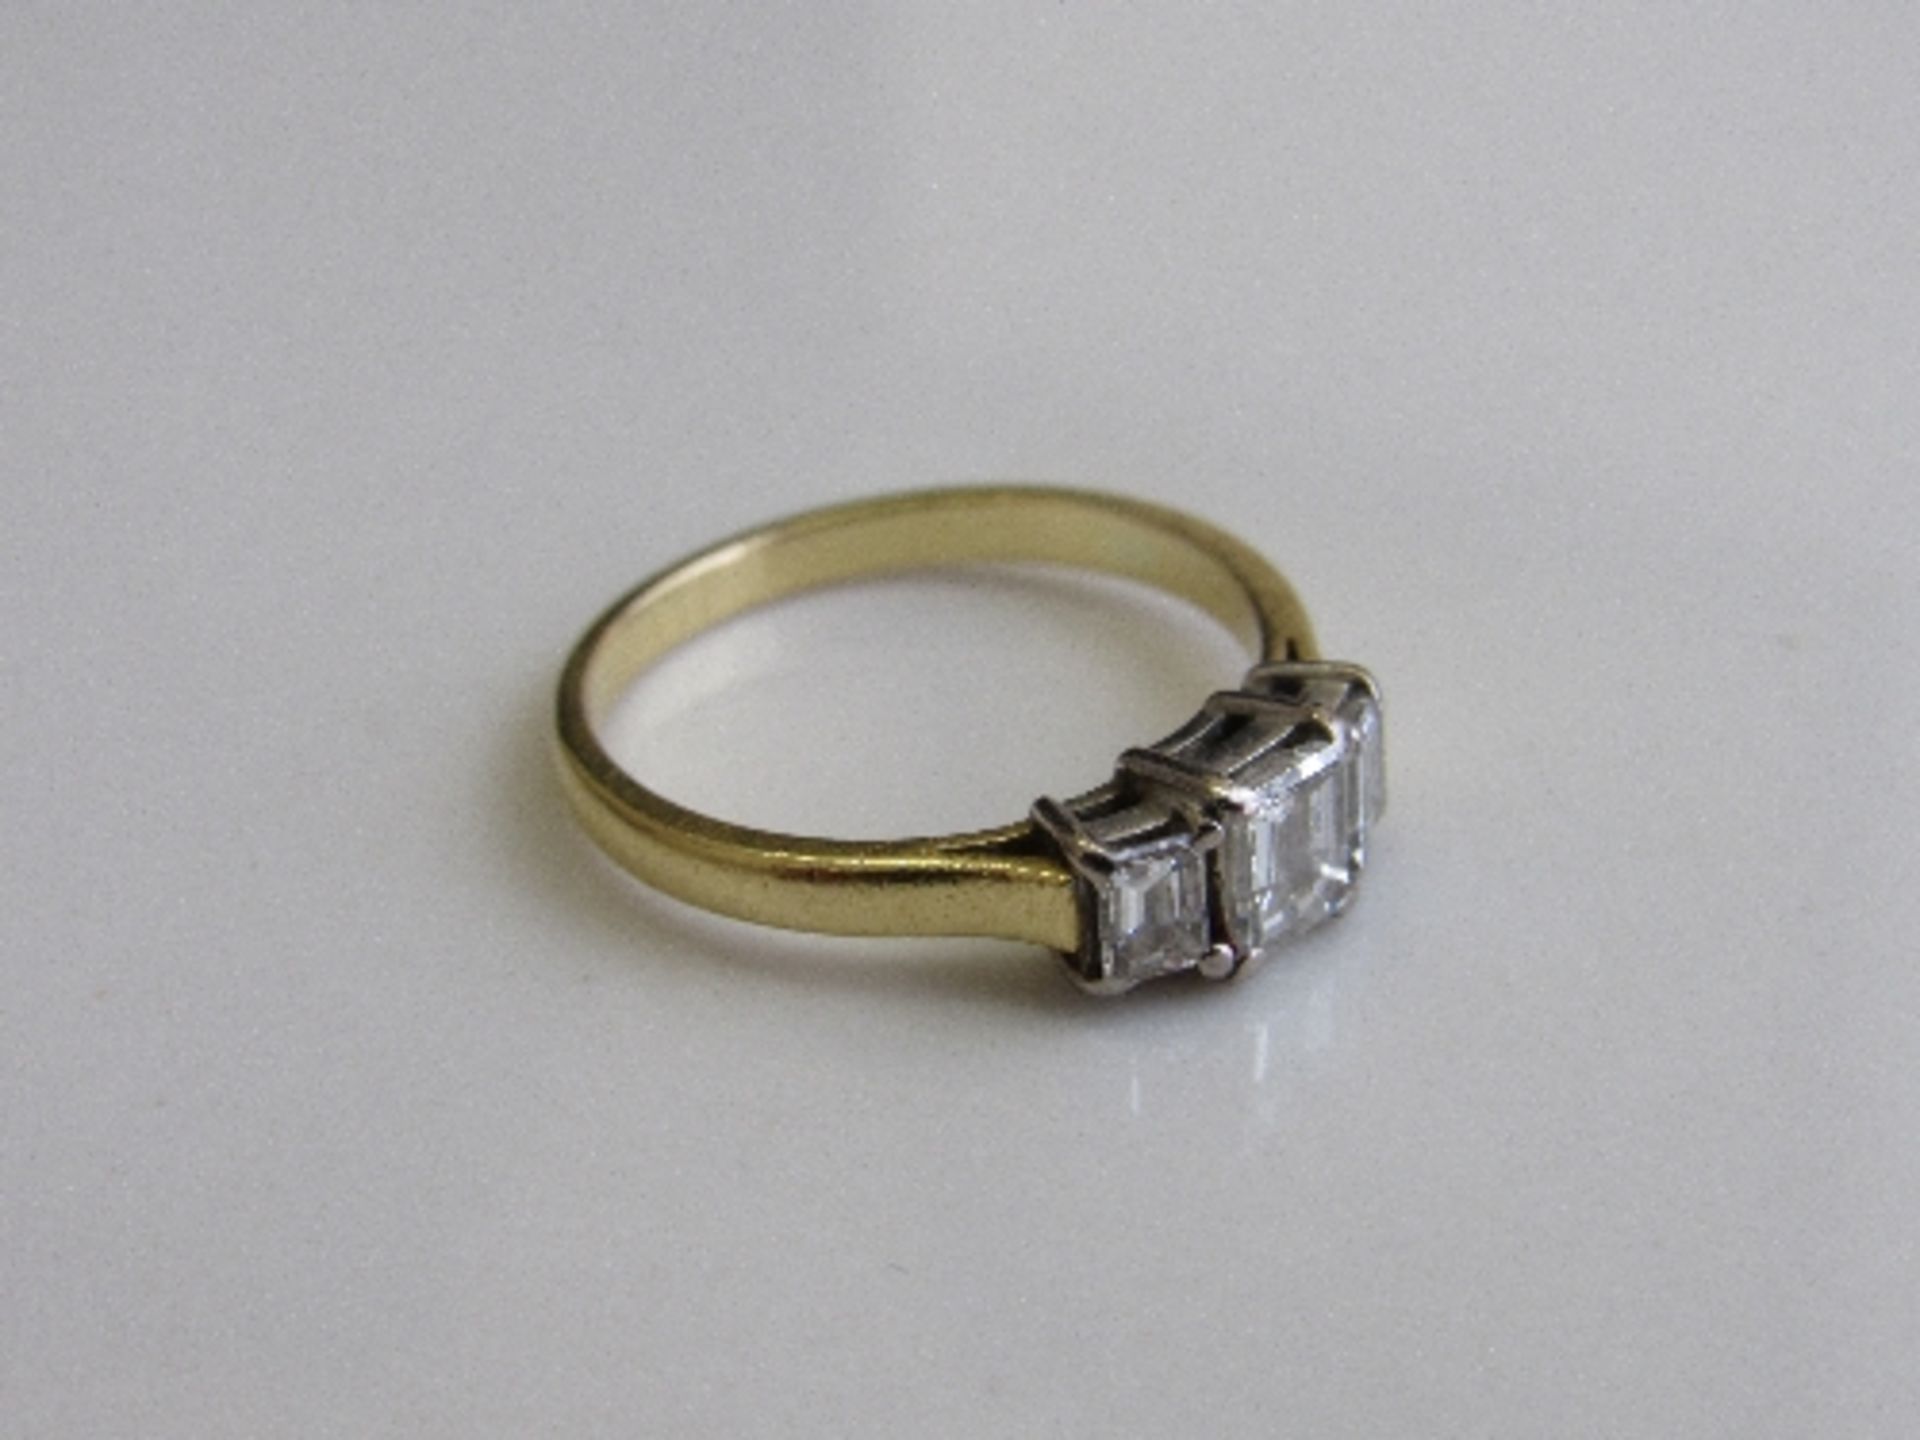 18ct gold & platinum Art Deco-style ring with 3 baguette cut diamonds, size N 1/2, weight 3.3gms.